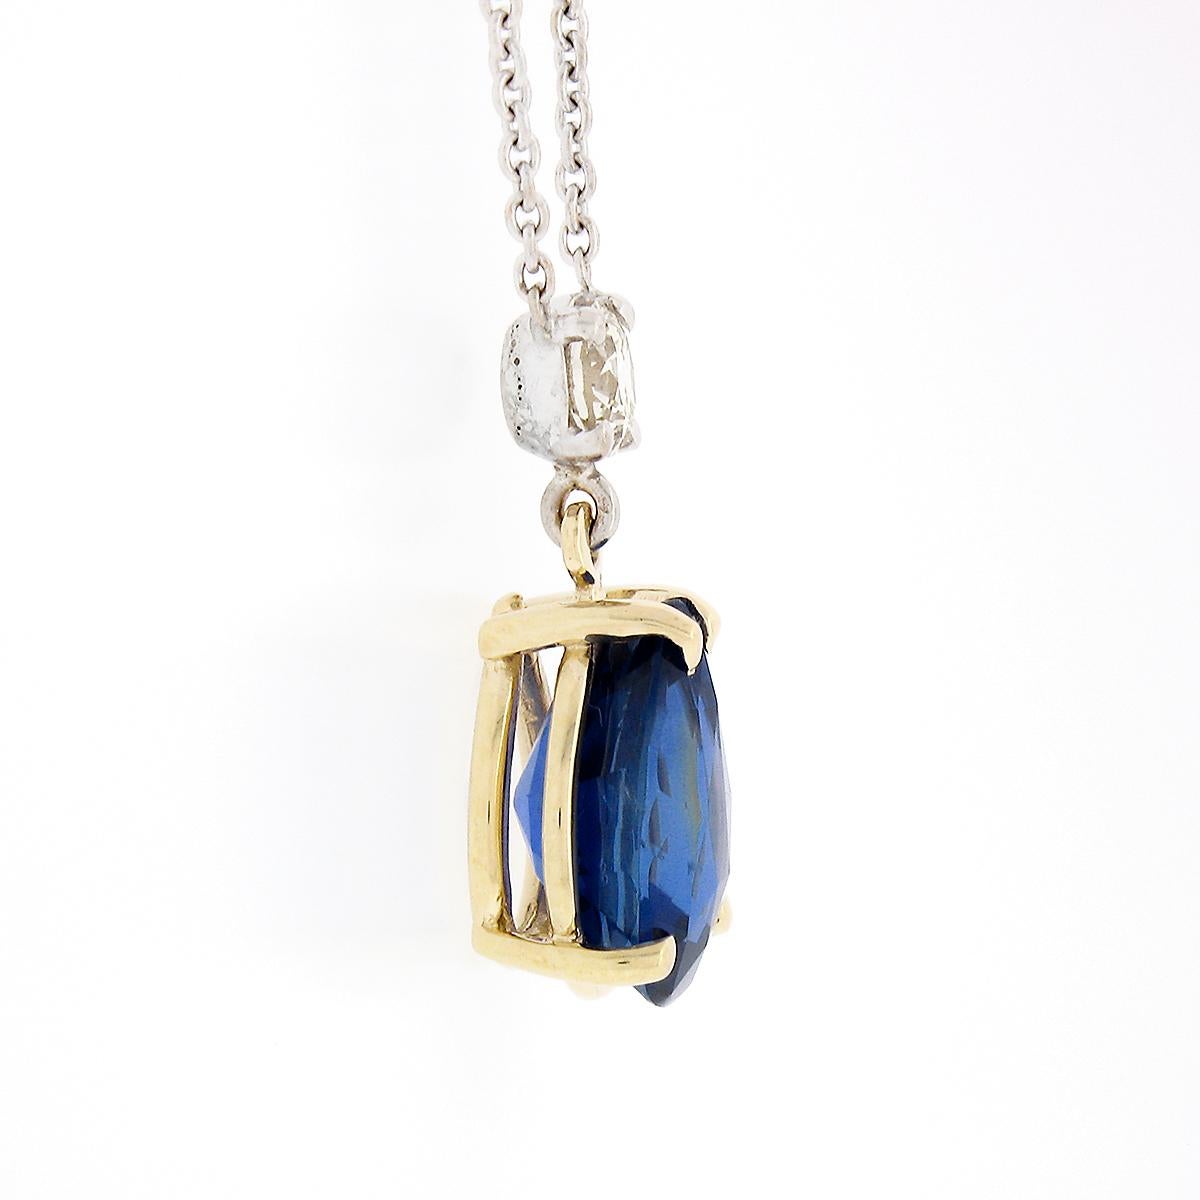 18k Gold 2.62ctw GIA Burma Sapphire and Diamond Pear Tear Drop Pendant Necklace In Good Condition For Sale In Montclair, NJ